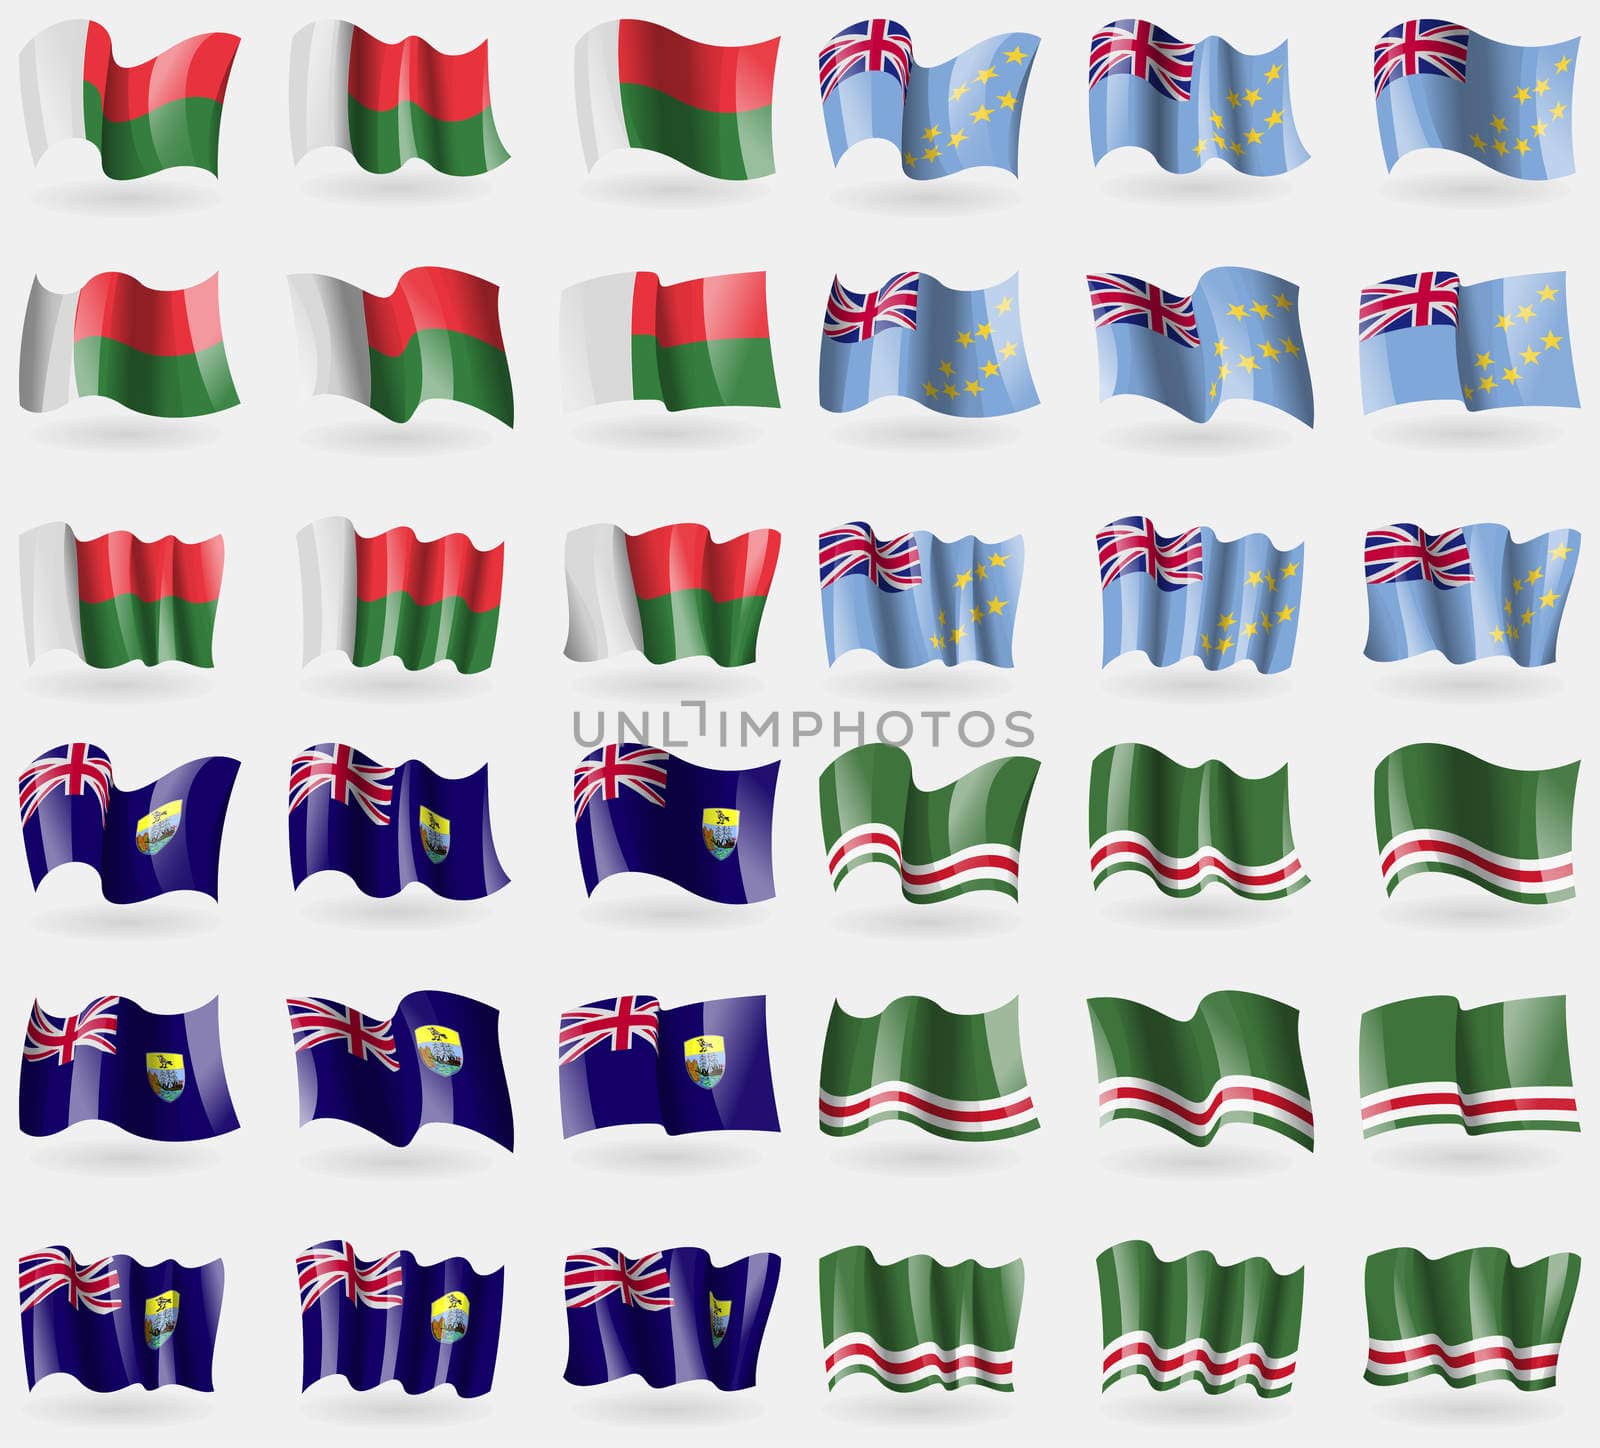 Madagascar, Tuvalu, Saint Helena, Chechen Republic of Ichkeria. Set of 36 flags of the countries of the world. illustration